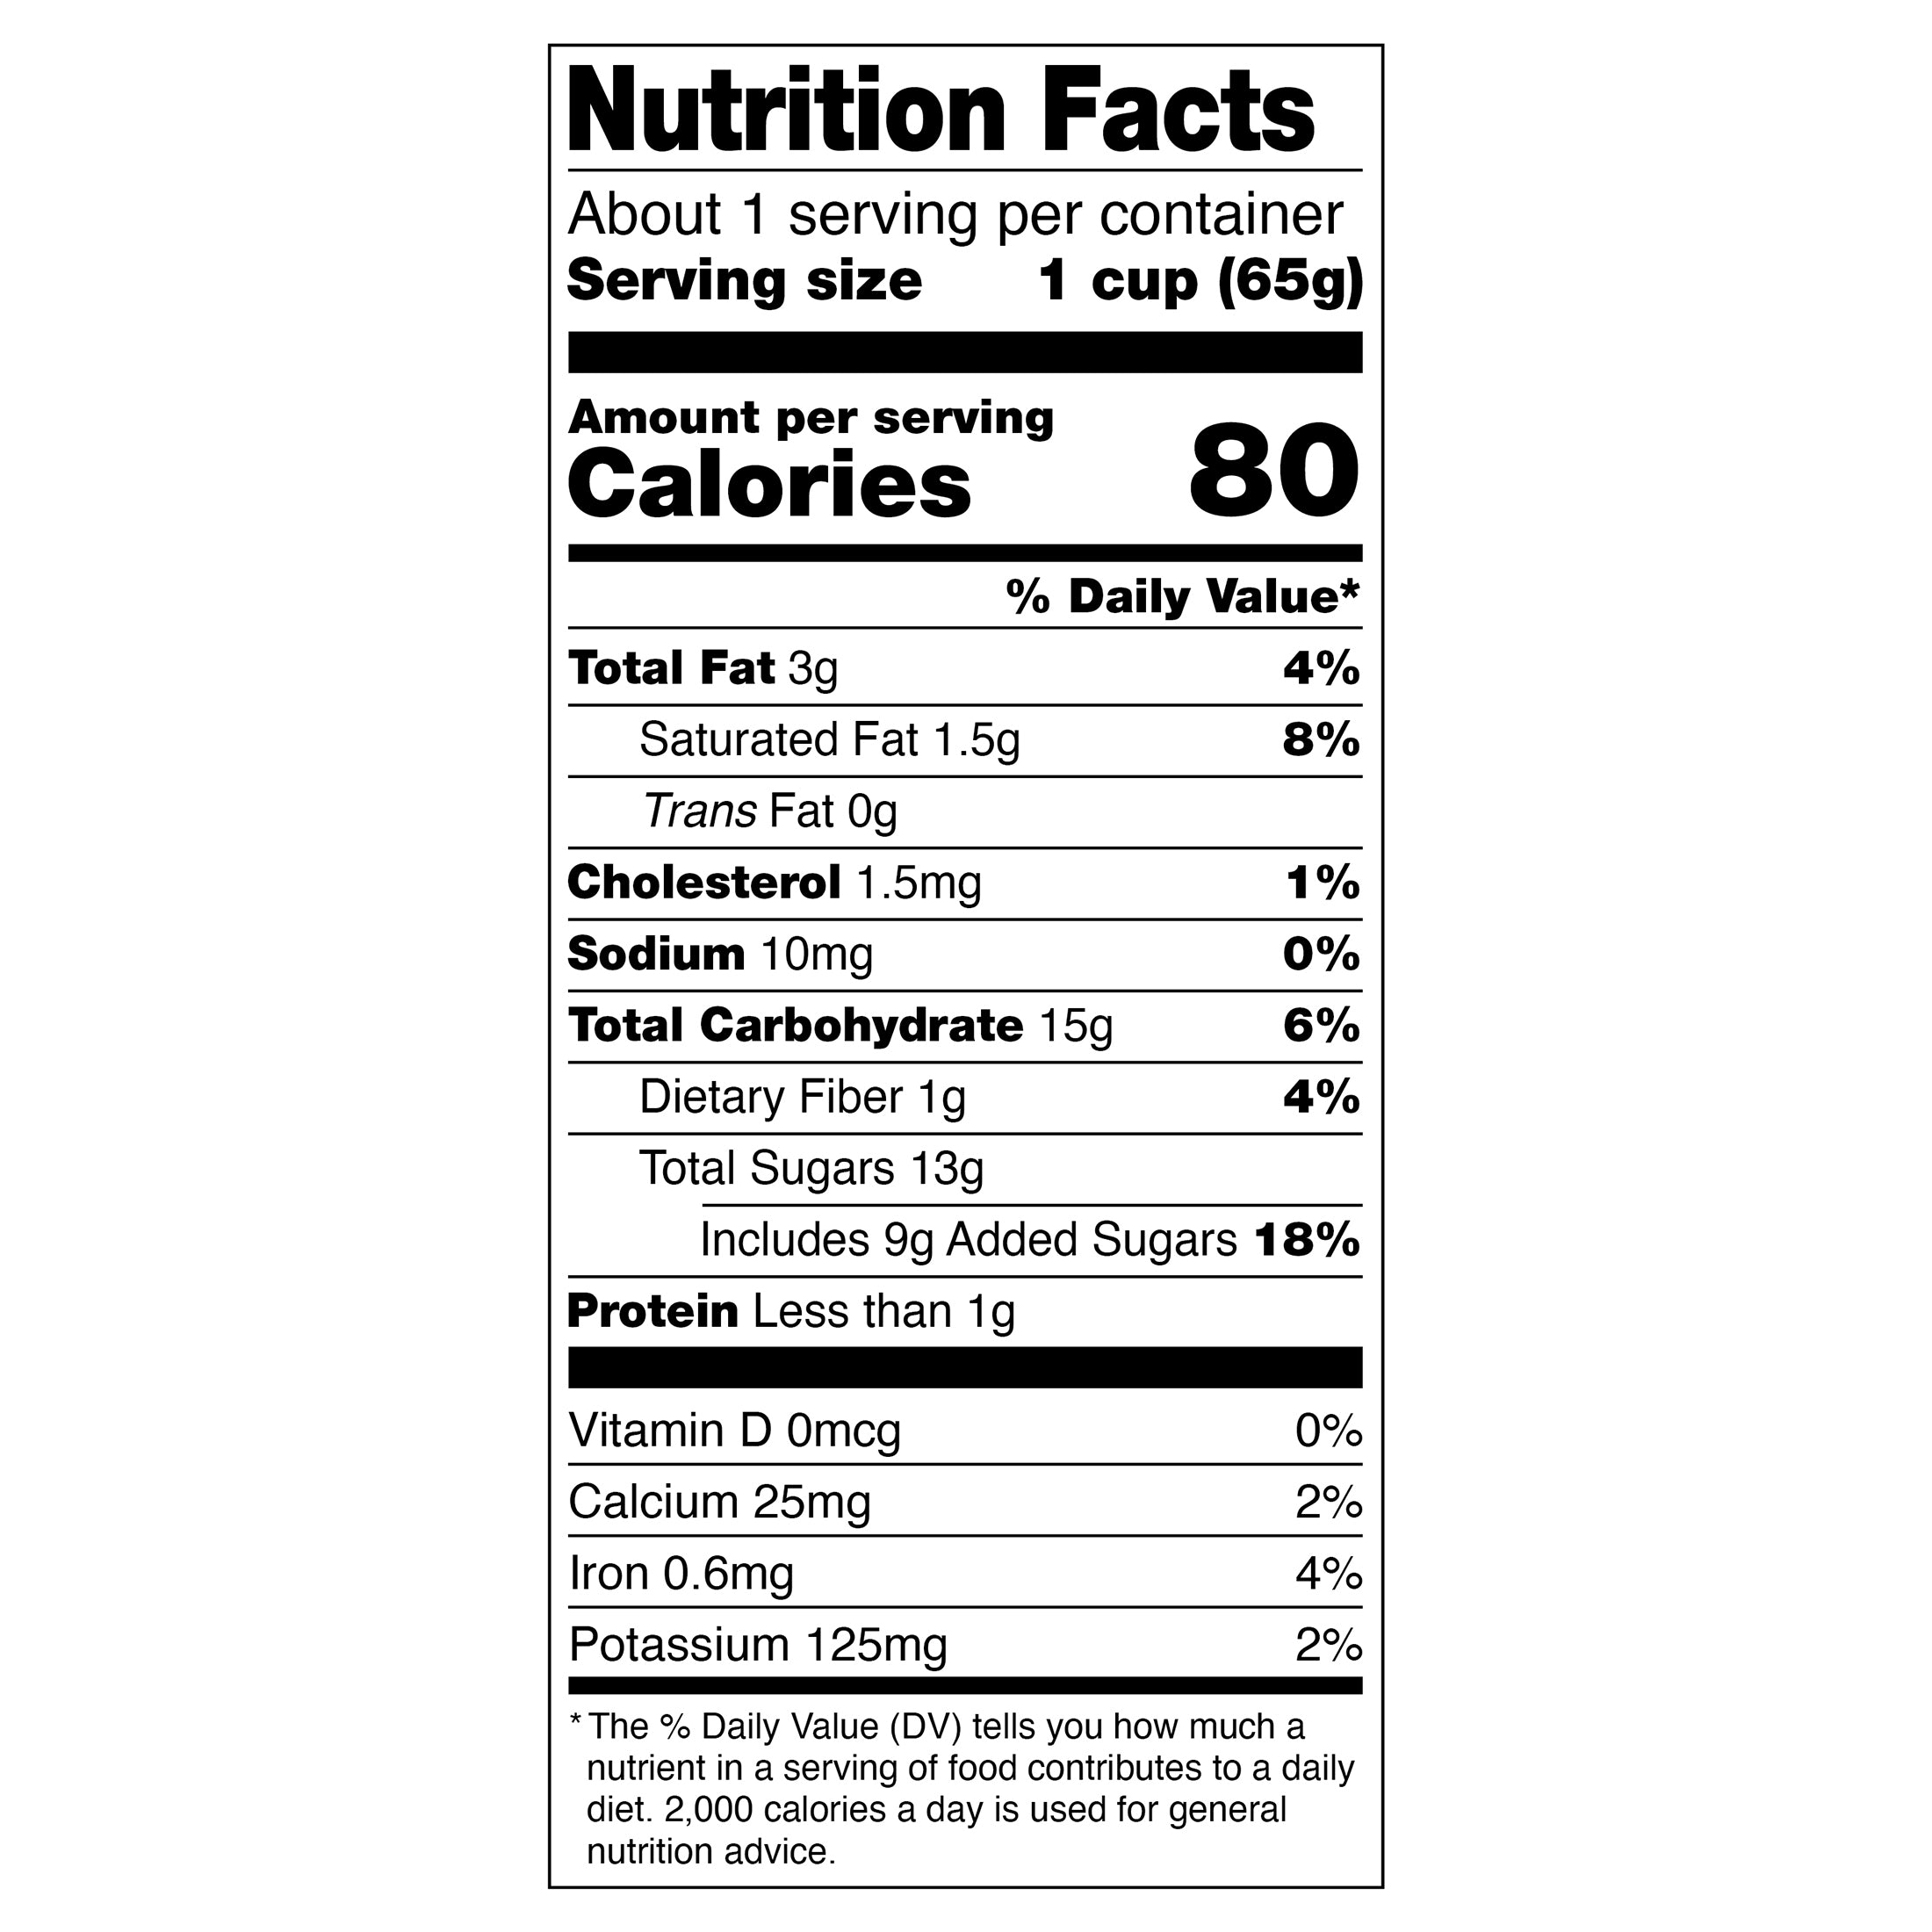 A nutrition label showing the nutrition facts of Shop Wyman's Just Fruit - Banana Bites with Chocolate.